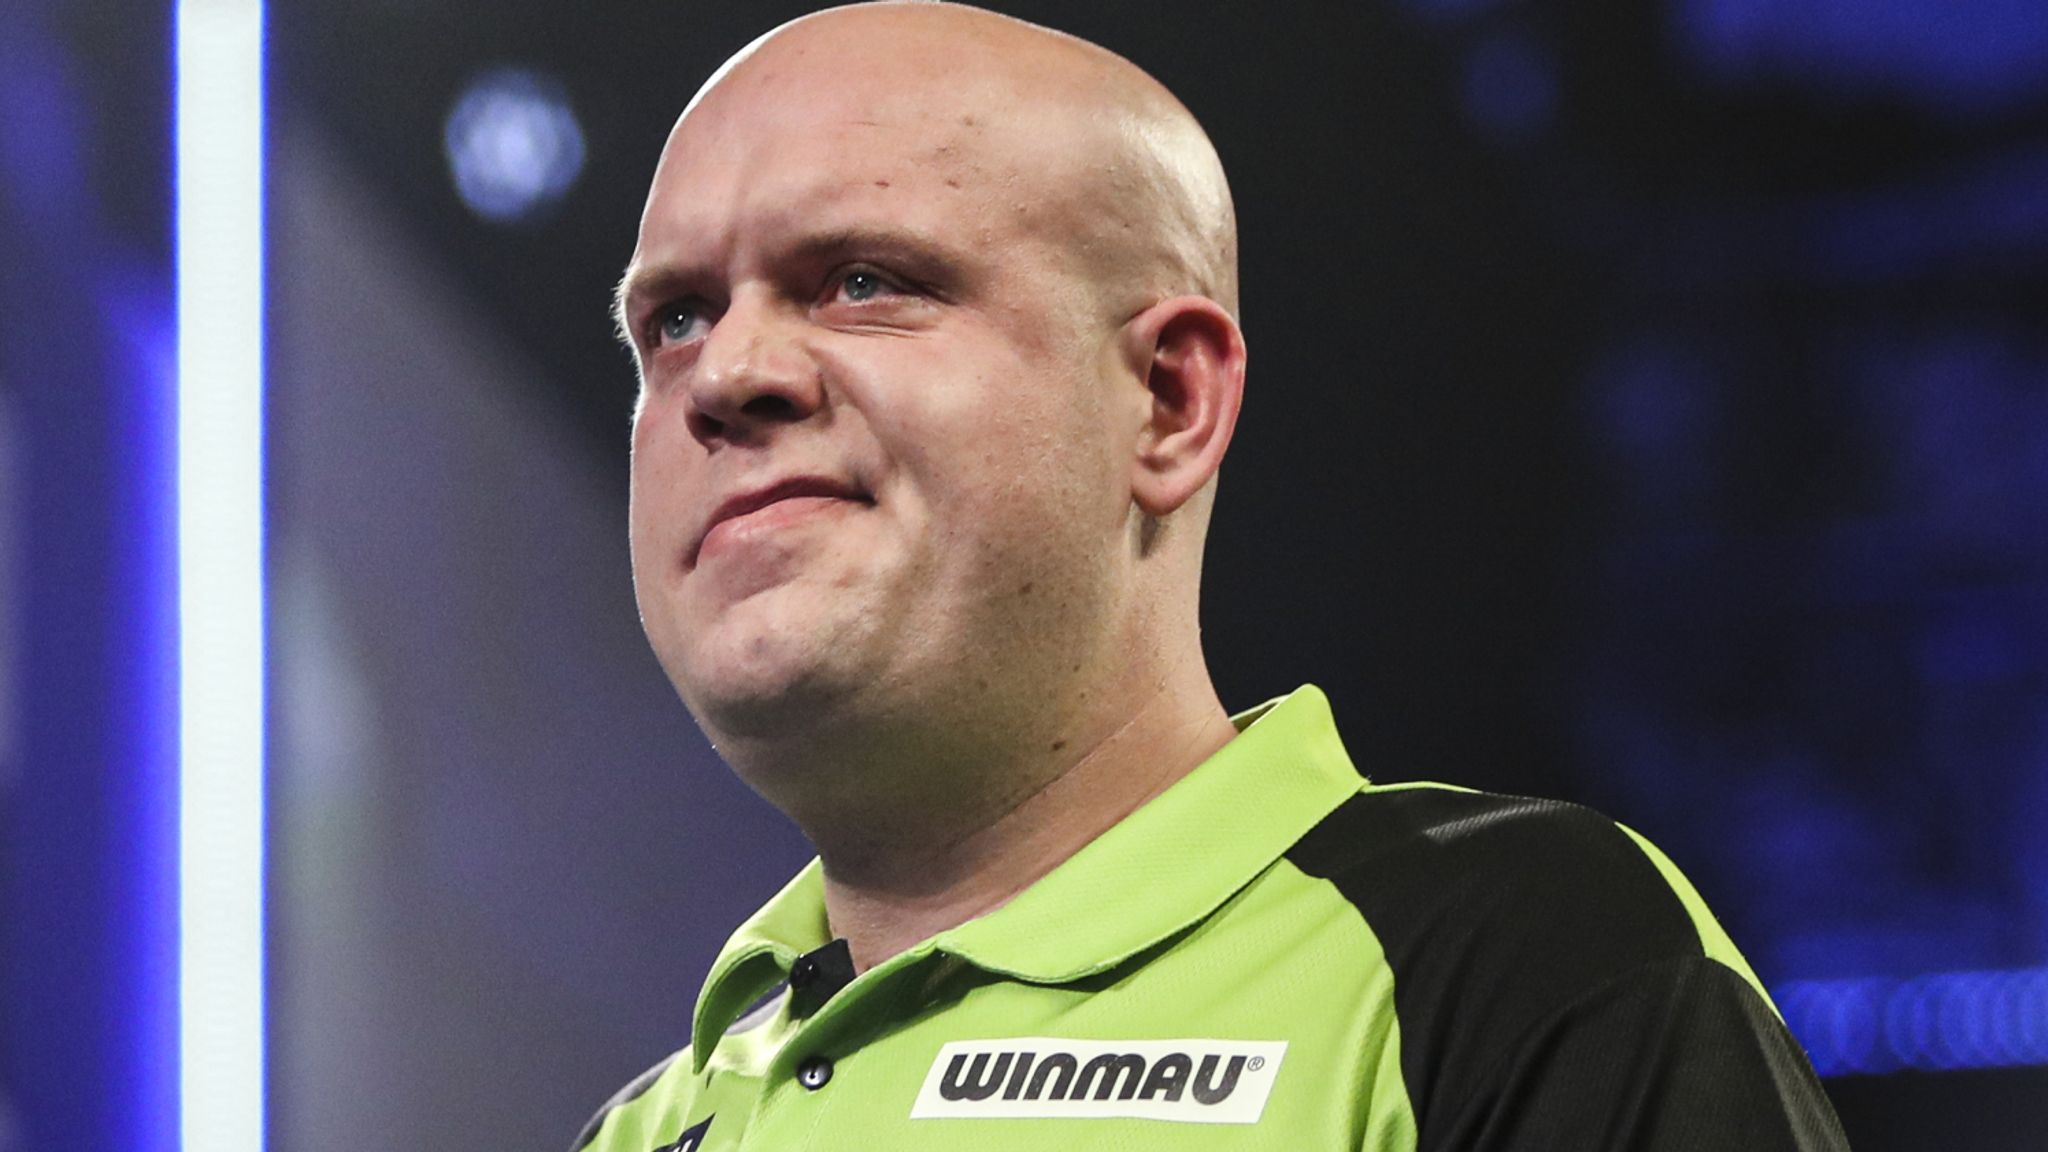 World Darts Championship: Michael van Gerwen should have been more careful avoiding Covid-19, says champion Wright | News | Sky